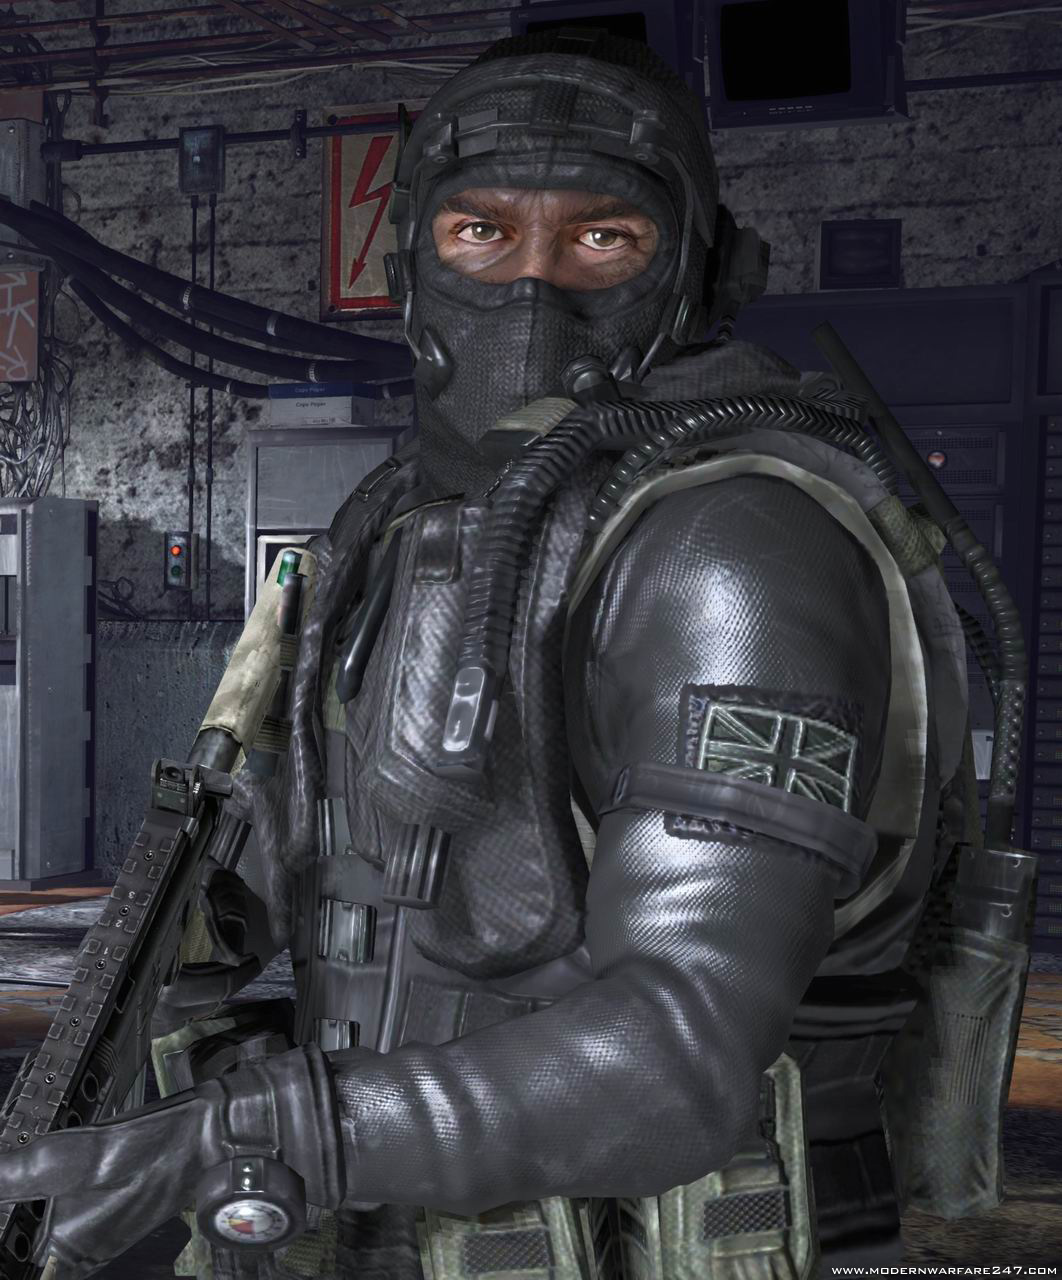 Special Operations Wet Suit image - Call of Duty Players.